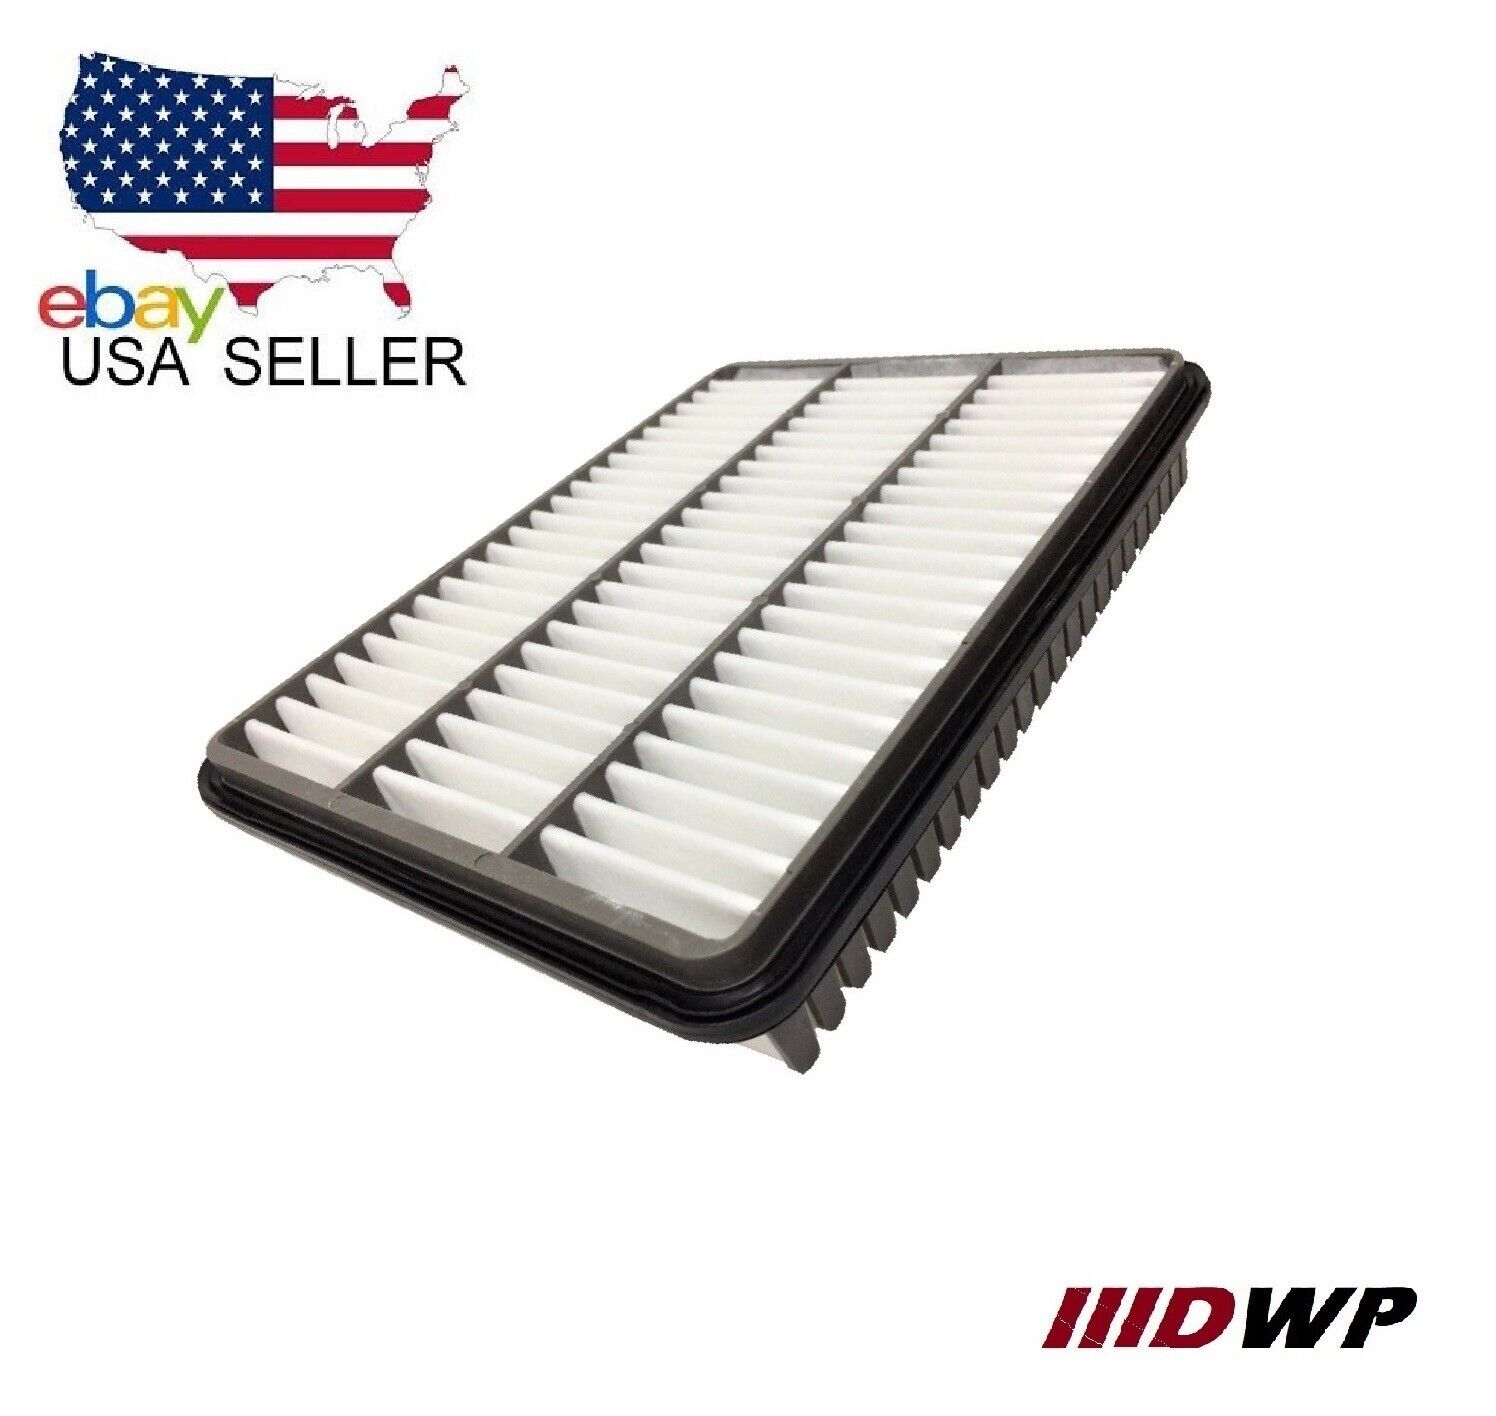 A35305 ENGINE AIR FILTER FOR GX470 LX470 4RUNNER LAND CRUISER SEQUOIA TUNDRA